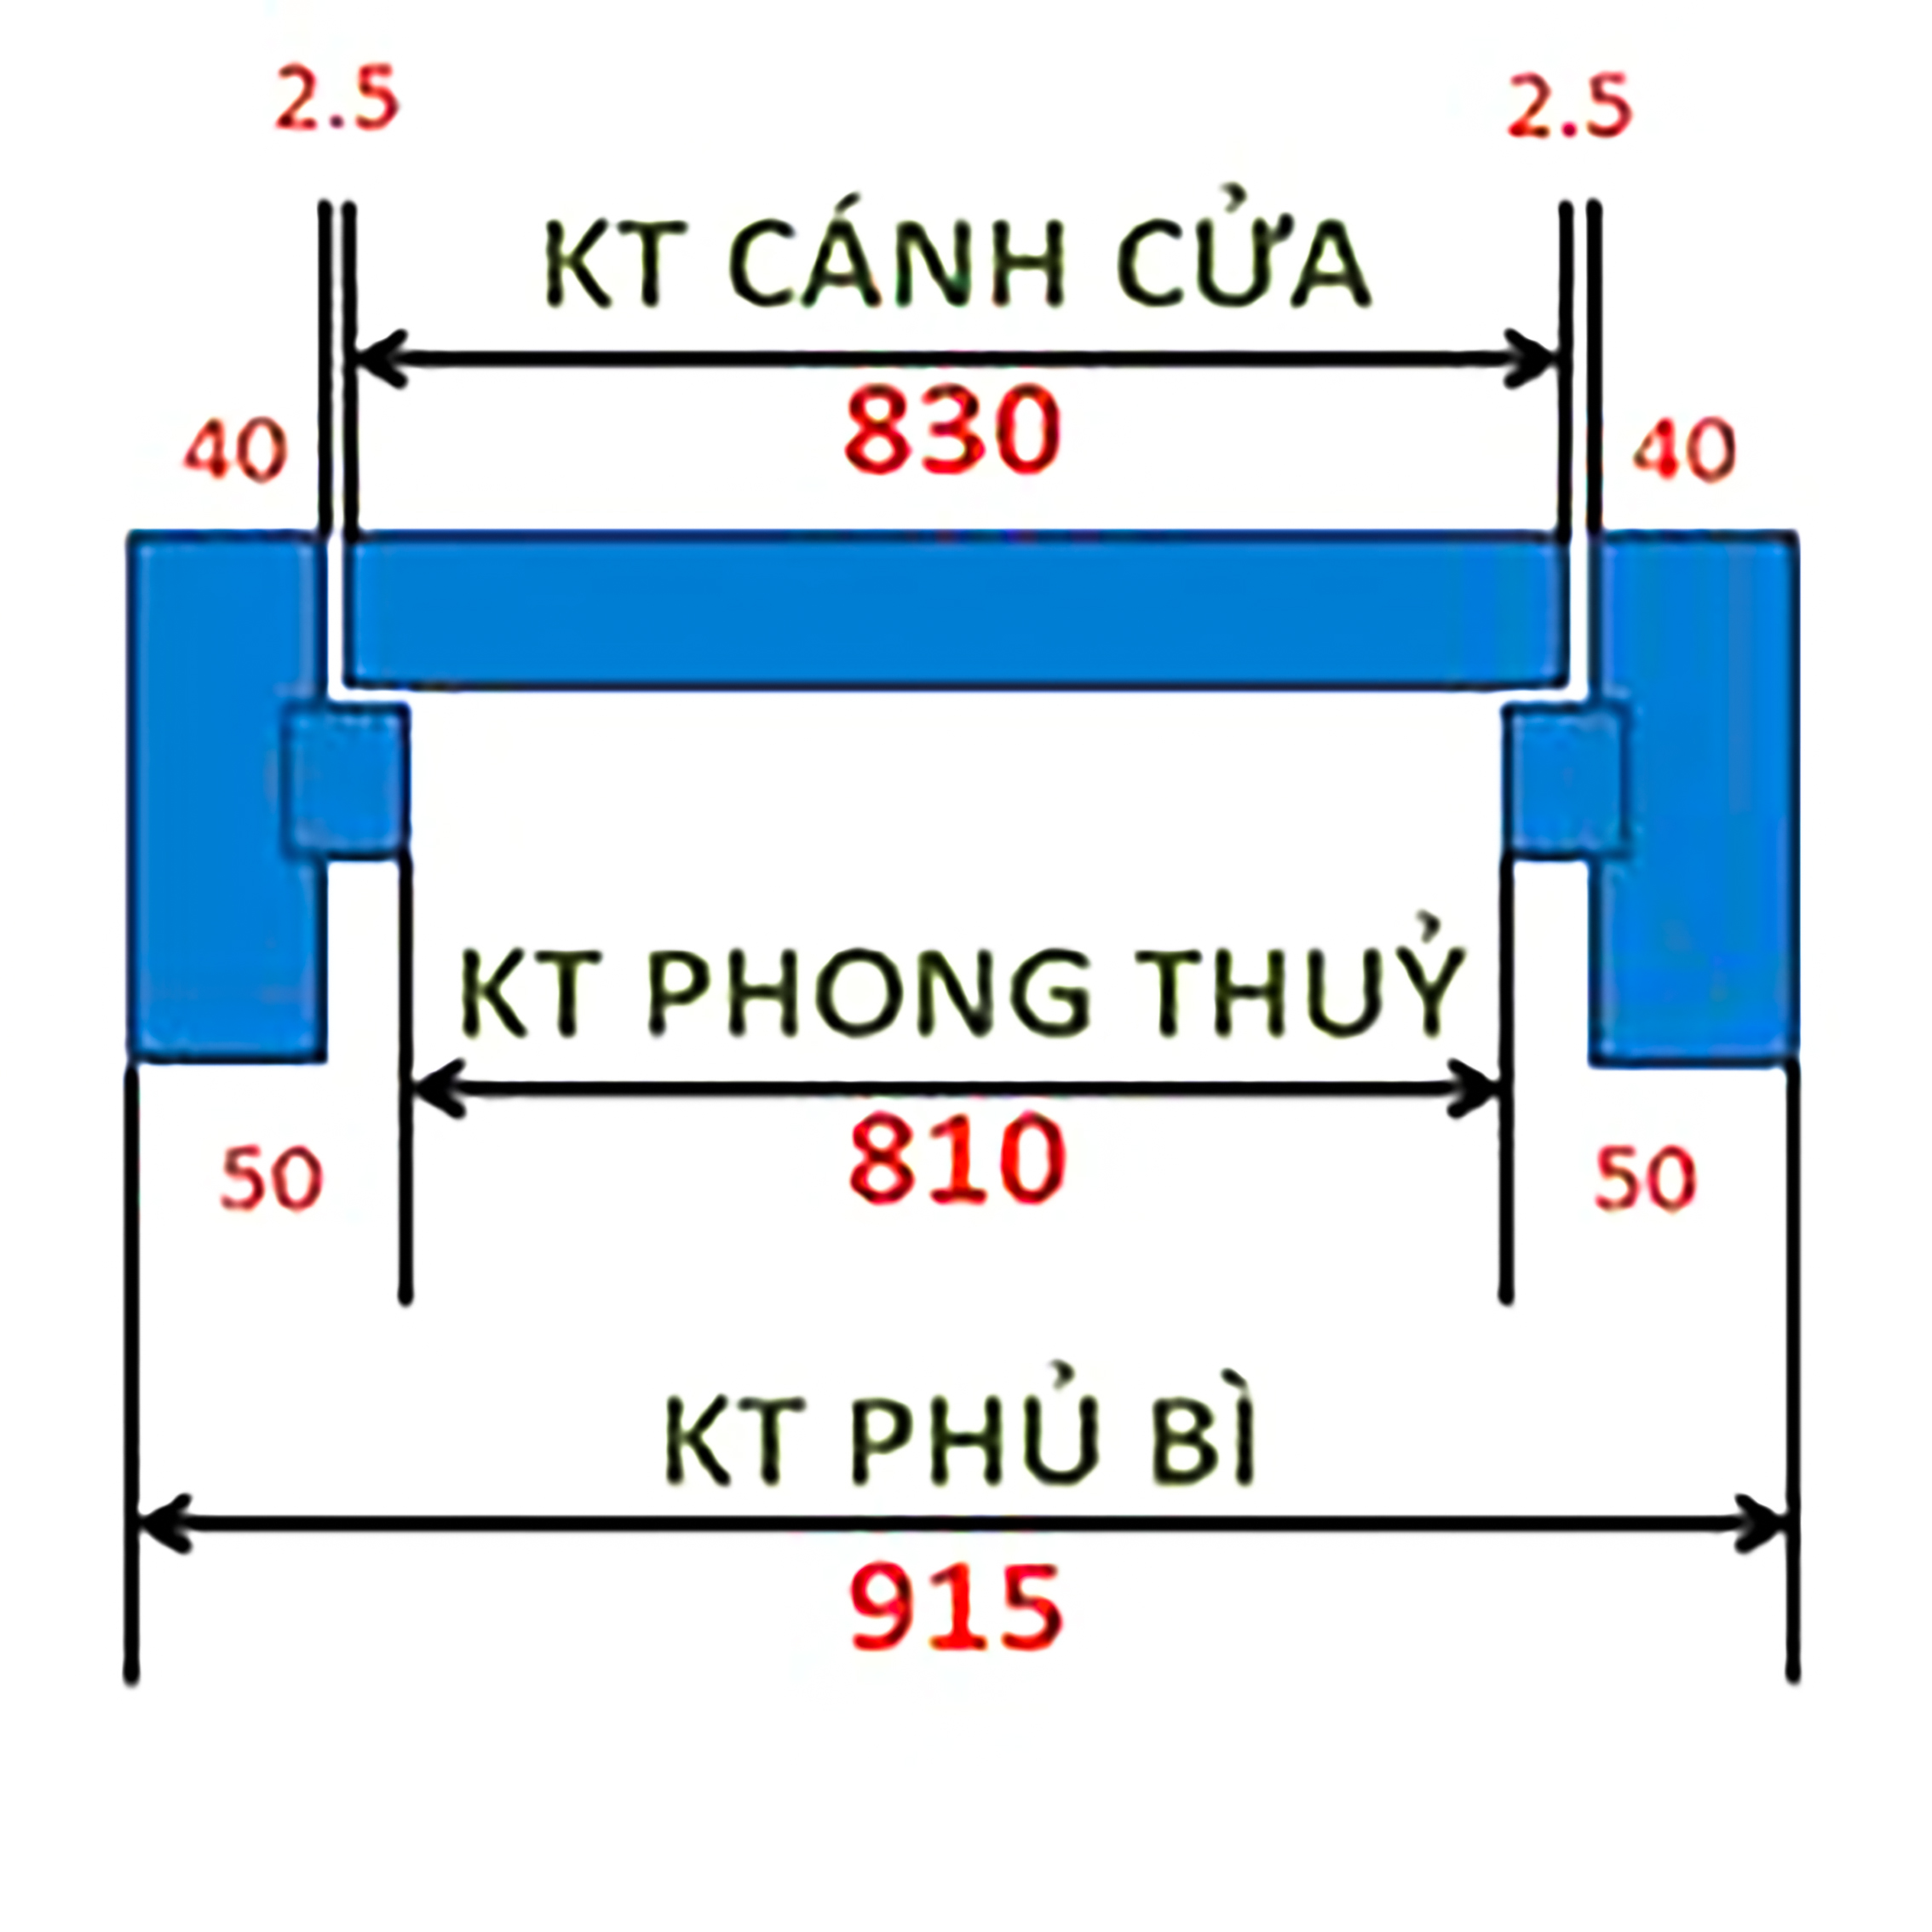 kich-thuoc-thong-thuy-quy-cach-chua-tuong-hoang-thien